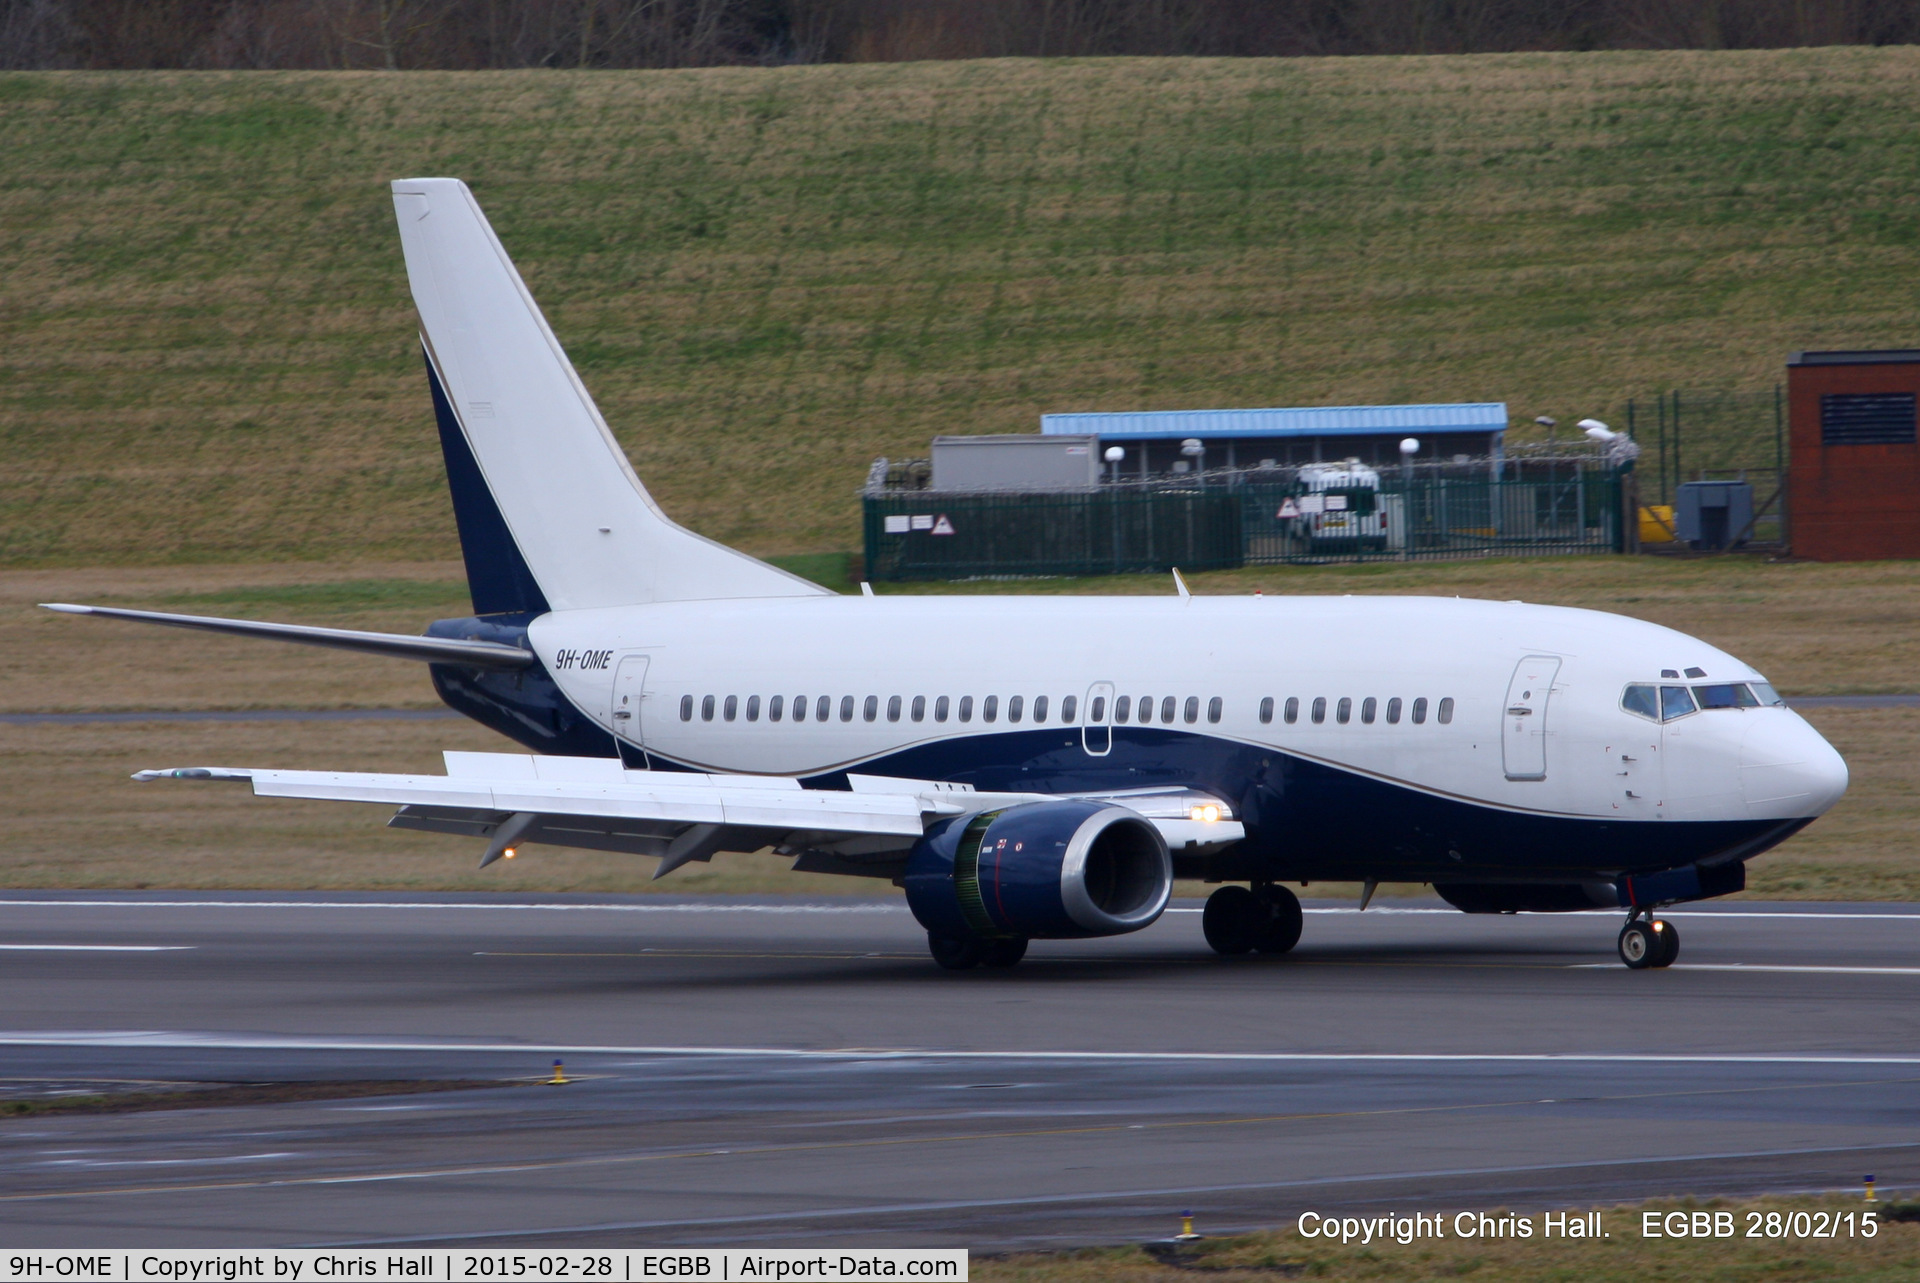 9H-OME, 1991 Boeing 737-505 C/N 24274, AIR X Charter